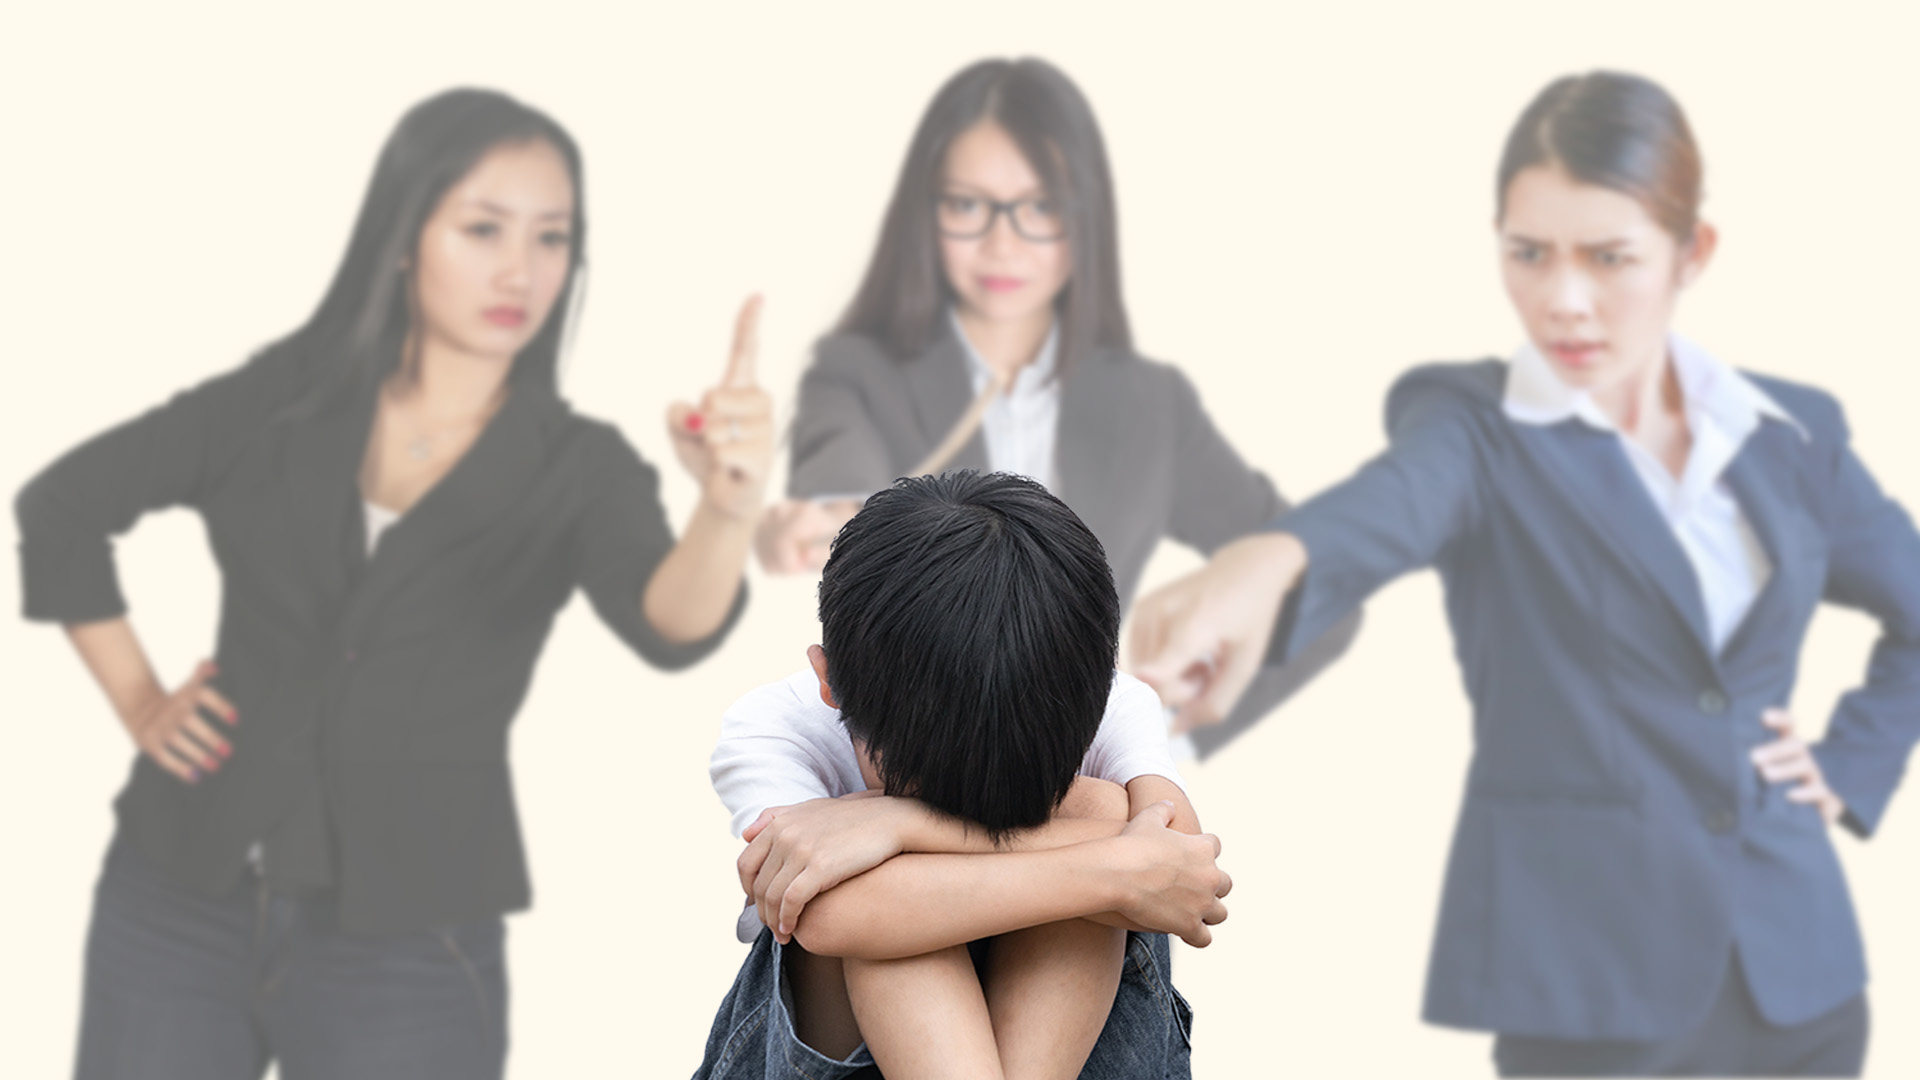 There have been online calls for a kindergarten in China to be closed down after a suspicious mother called in the police who discovered the “repeated abuse” of children leading to the sacking of three teachers. Photo: SCMP composite/Shutterstock